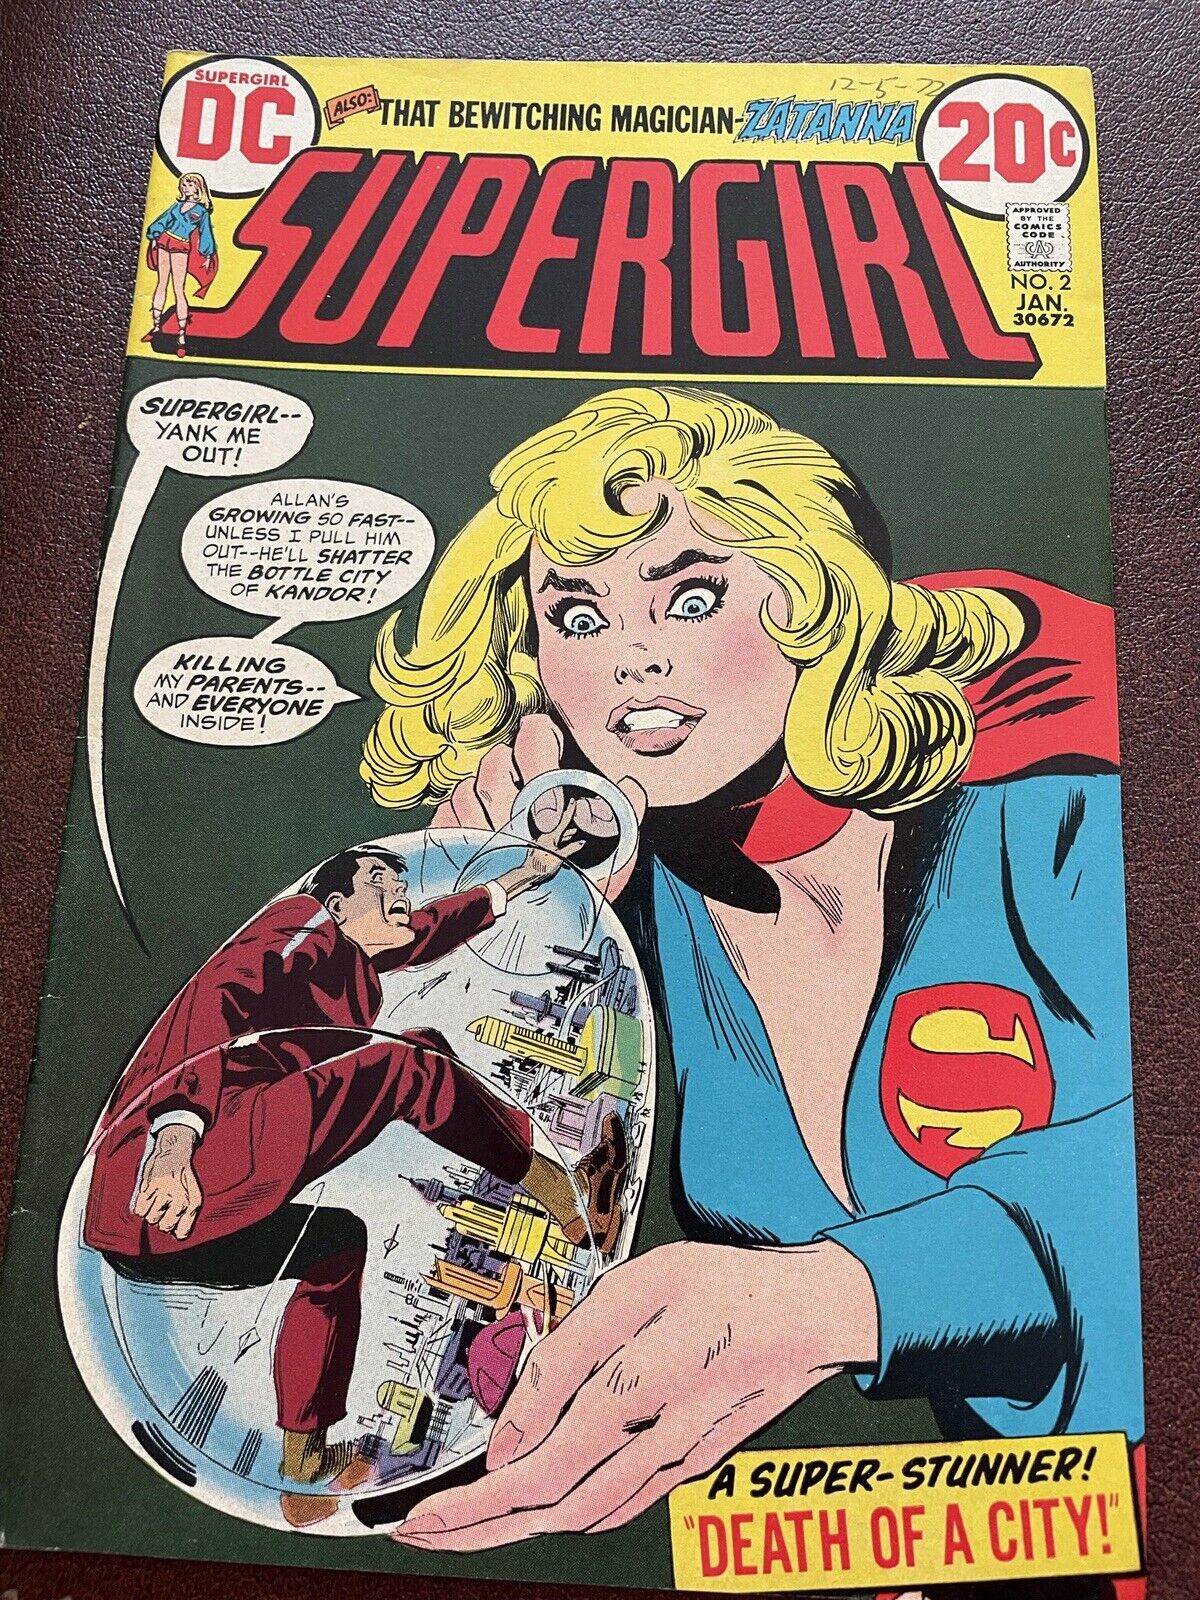 SuperGirl #2 Comic Book 1973 TOTAL CLASSIC HAS Not SEEN SUNLIGHT IN 45yrs 🔥💥🔥